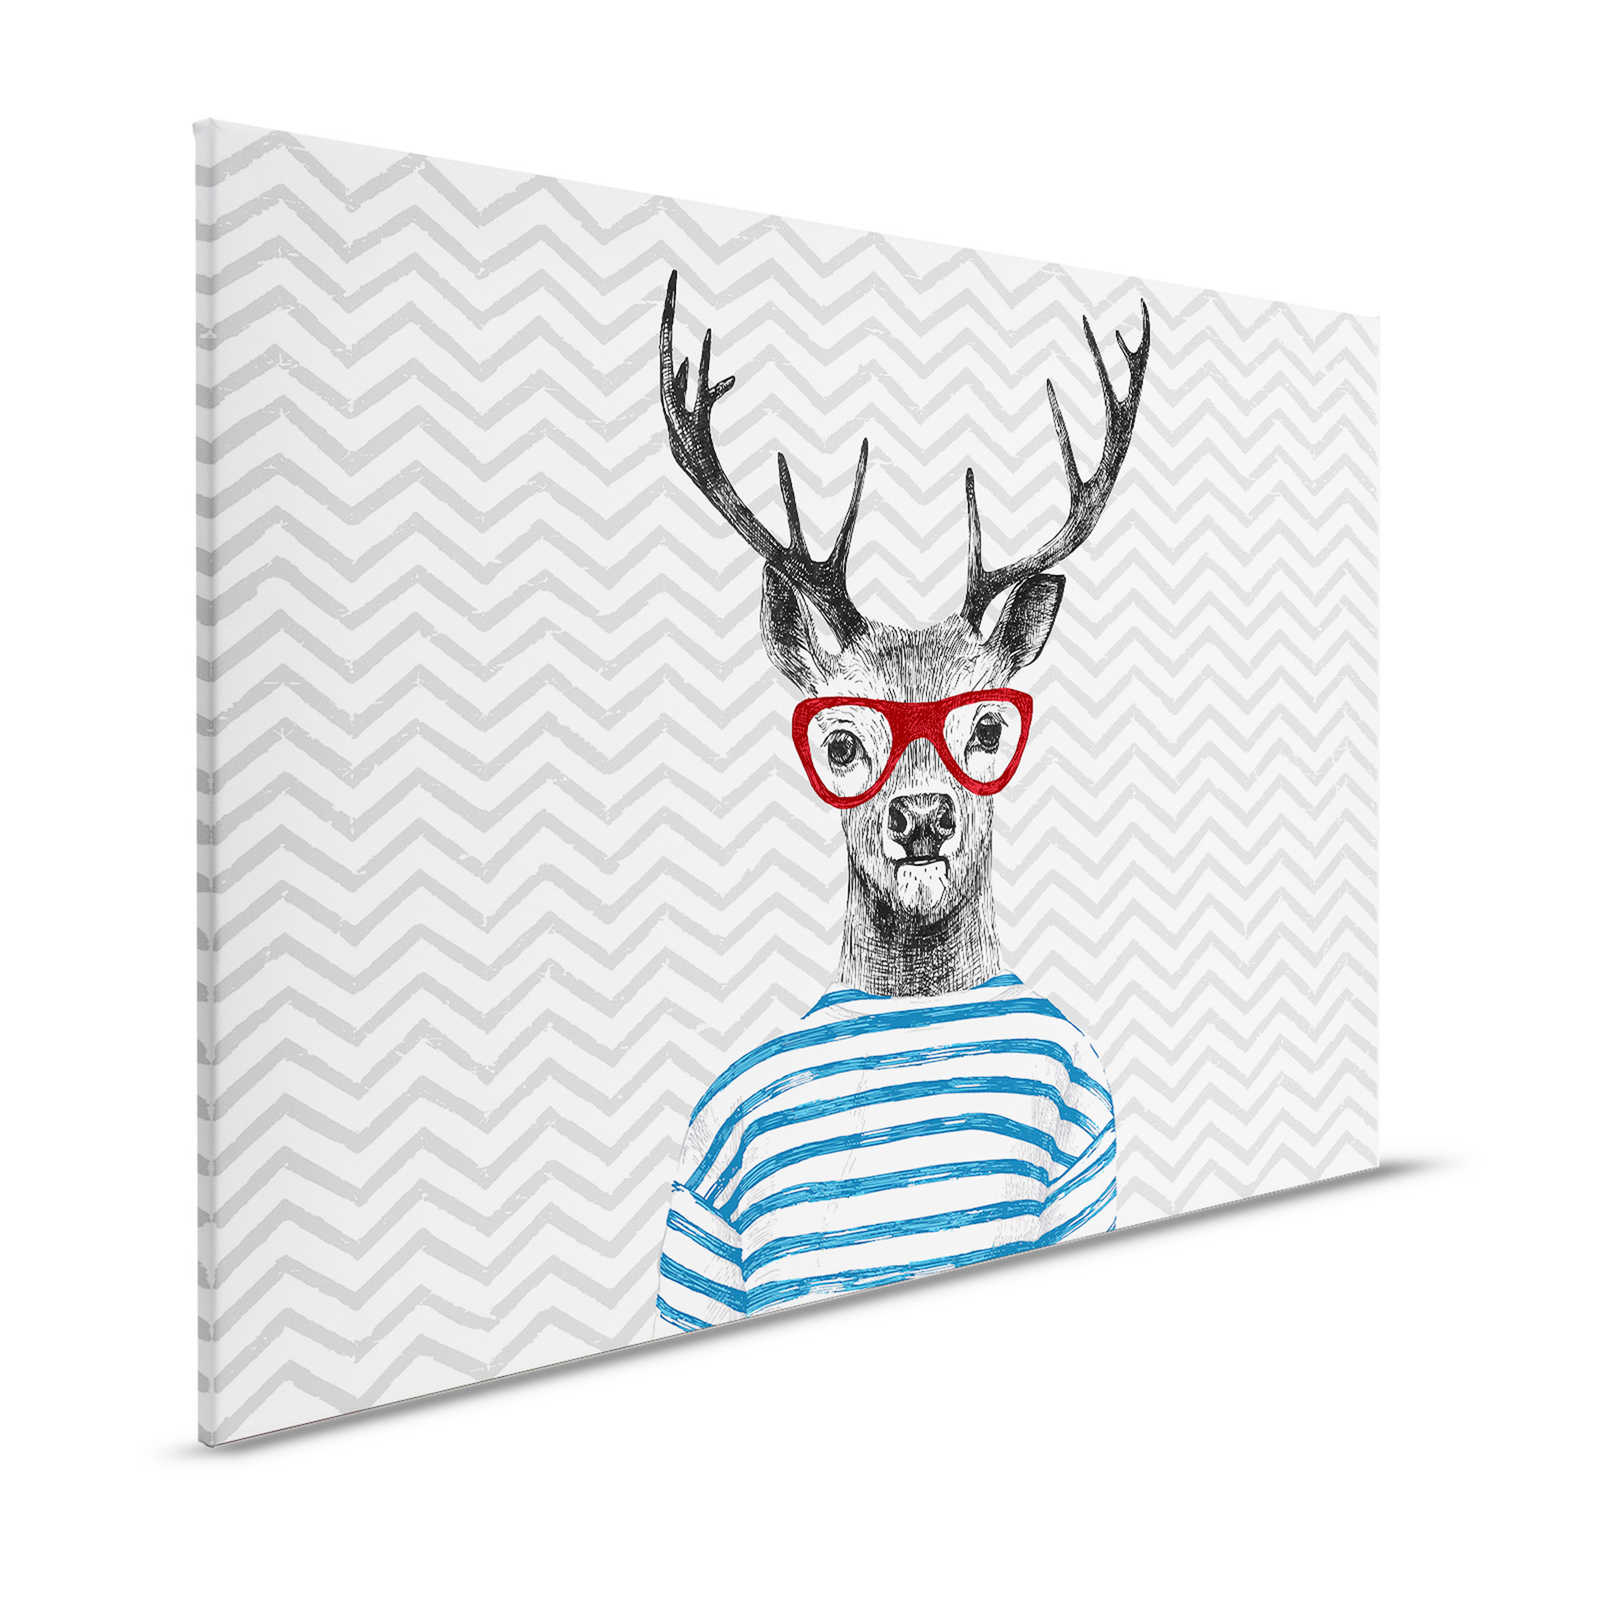 Children's Room Canvas Painting Comic Design, Deer with Glasses - 1.20 m x 0.80 m
